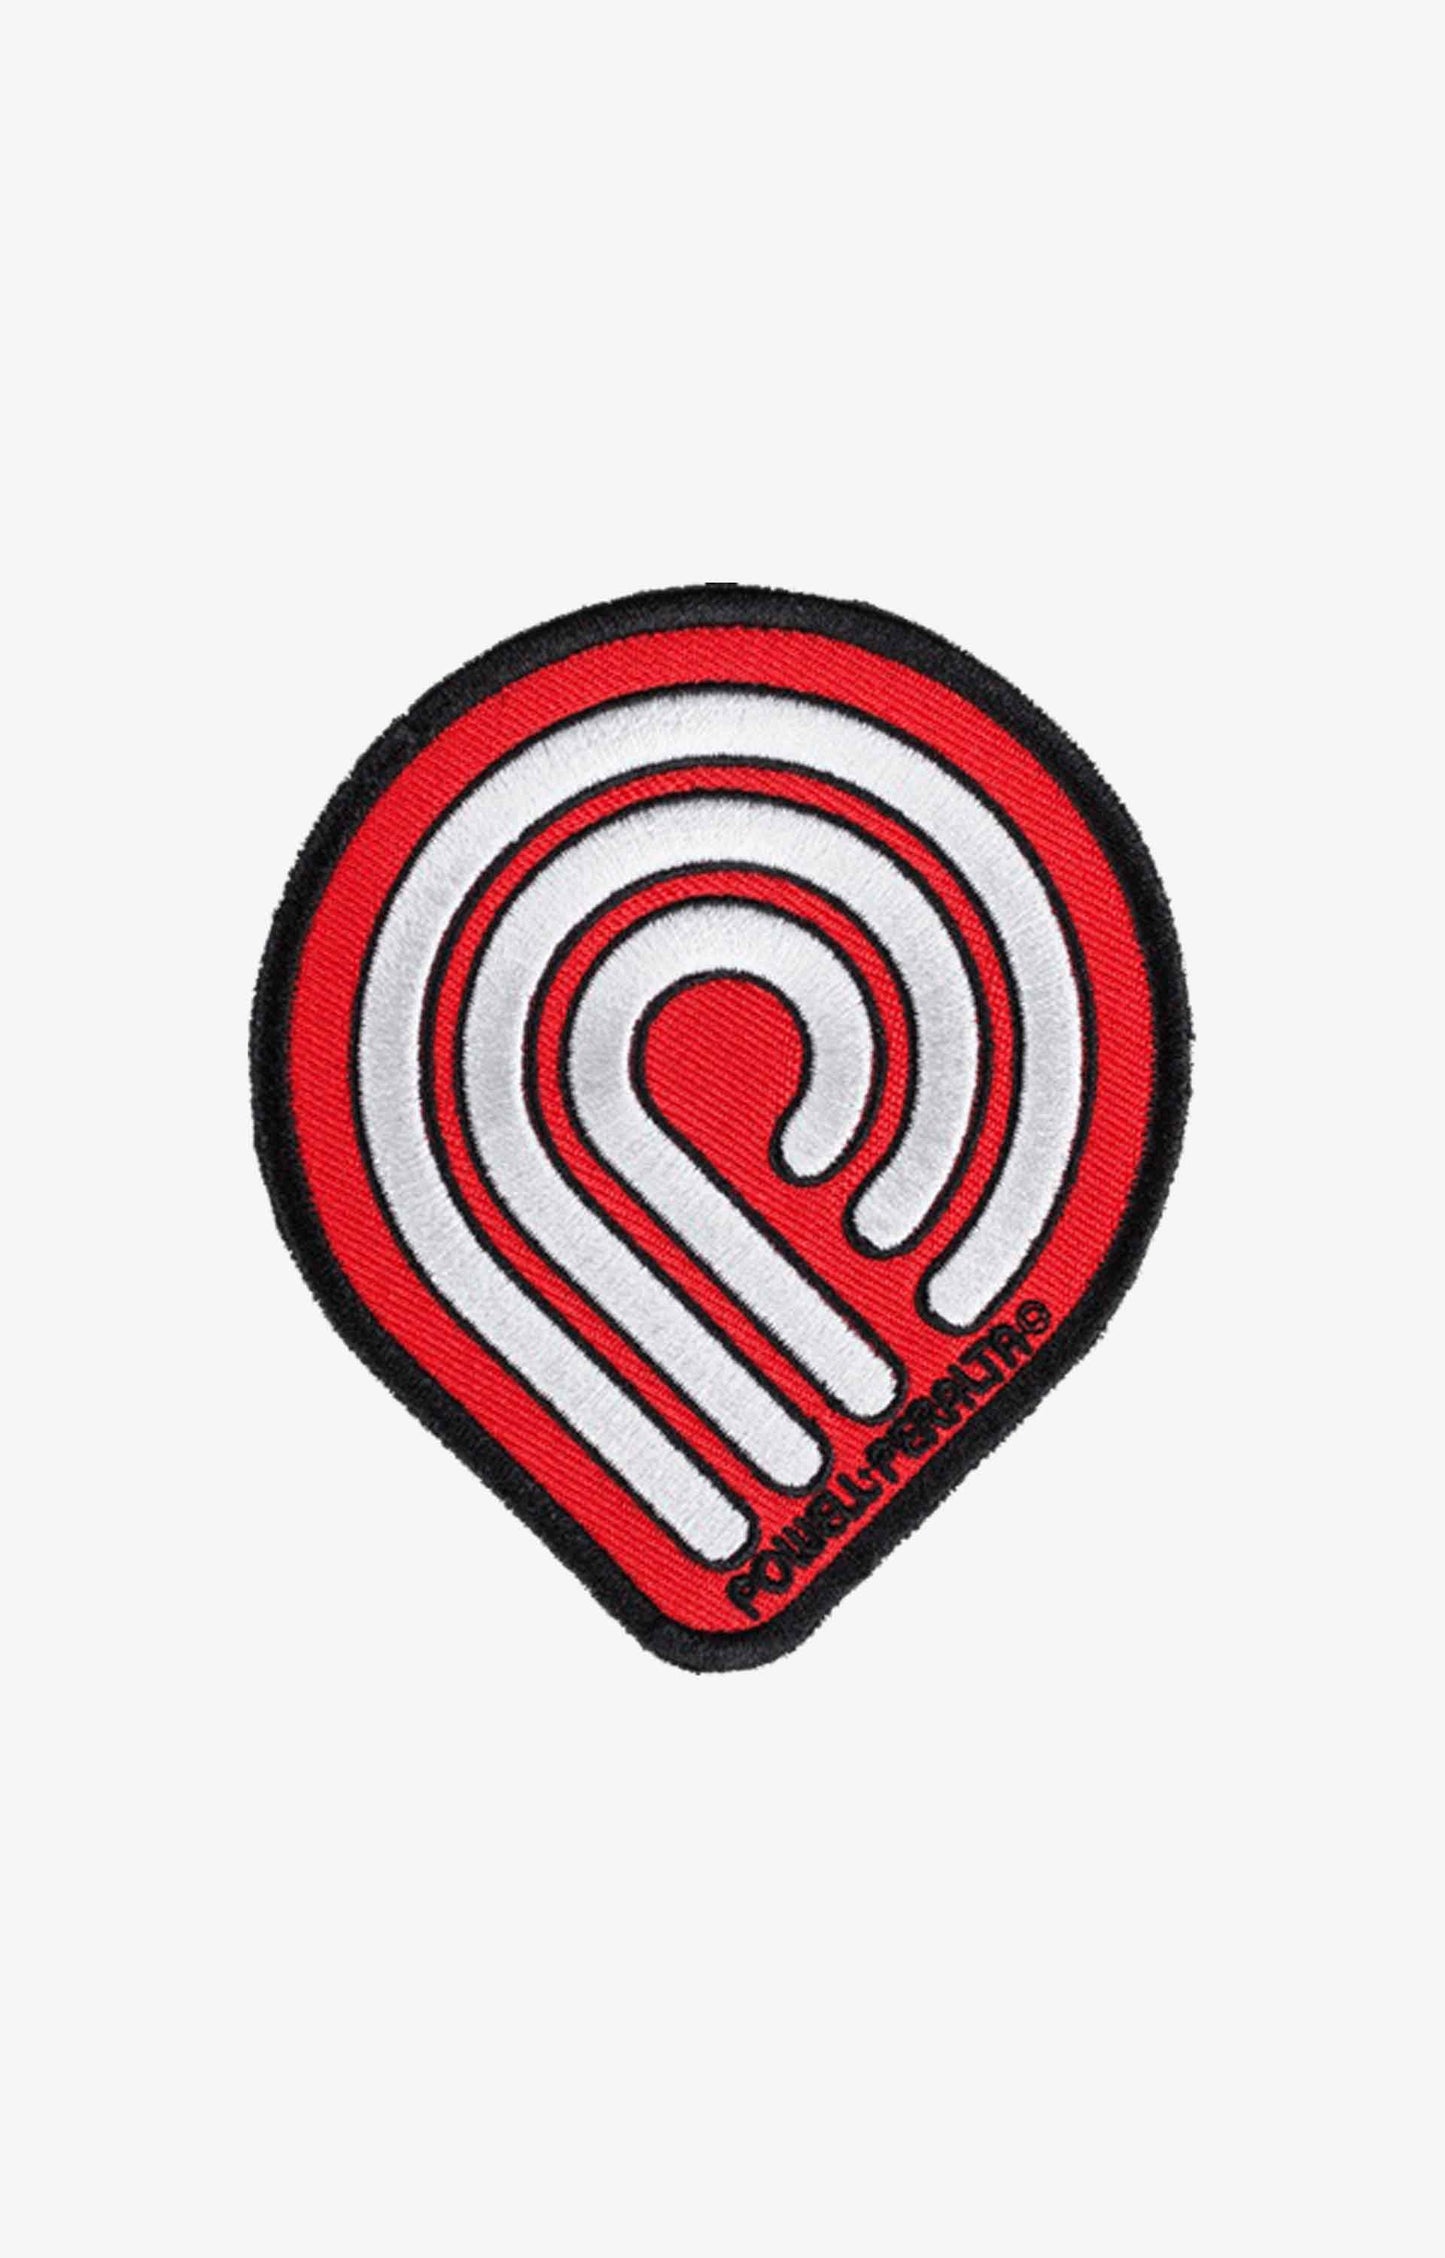 Powell Peralta Patch Triple P Patch, 3.5"